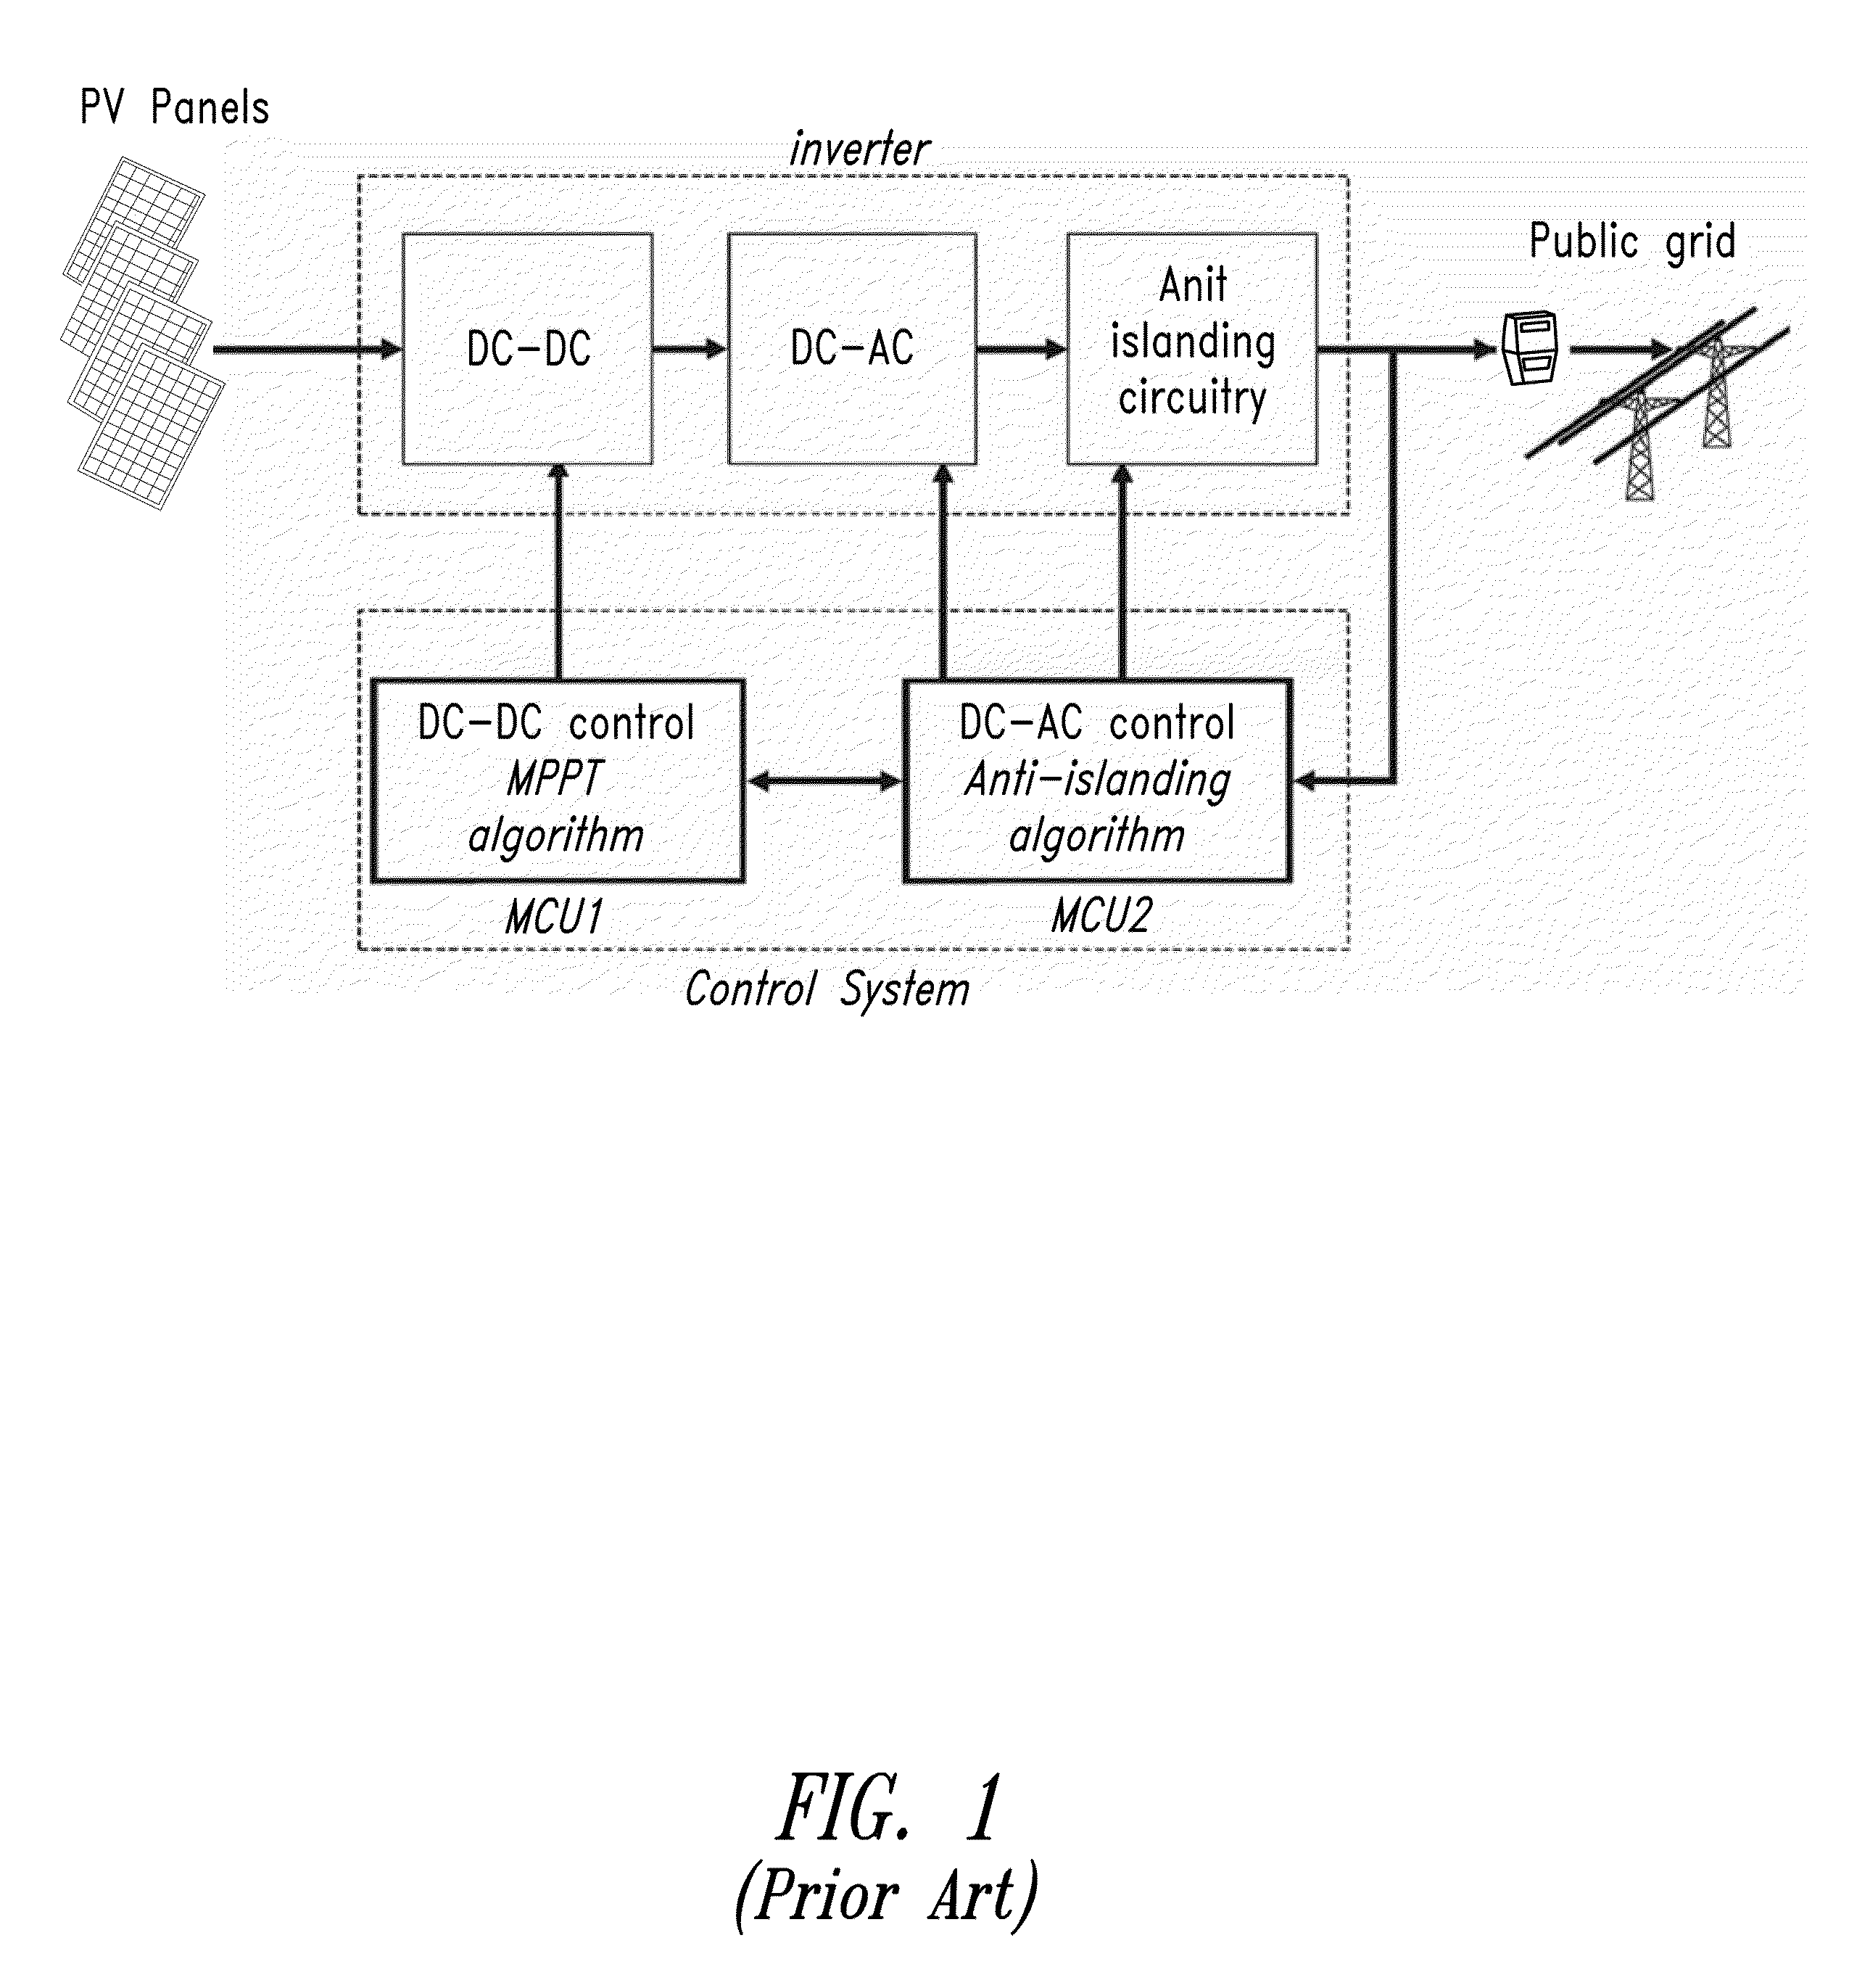 Multi-cellular photovoltaic panel system with DC-DC conversion replicated for groups of cells in series of each panel and photovoltaic panel structure